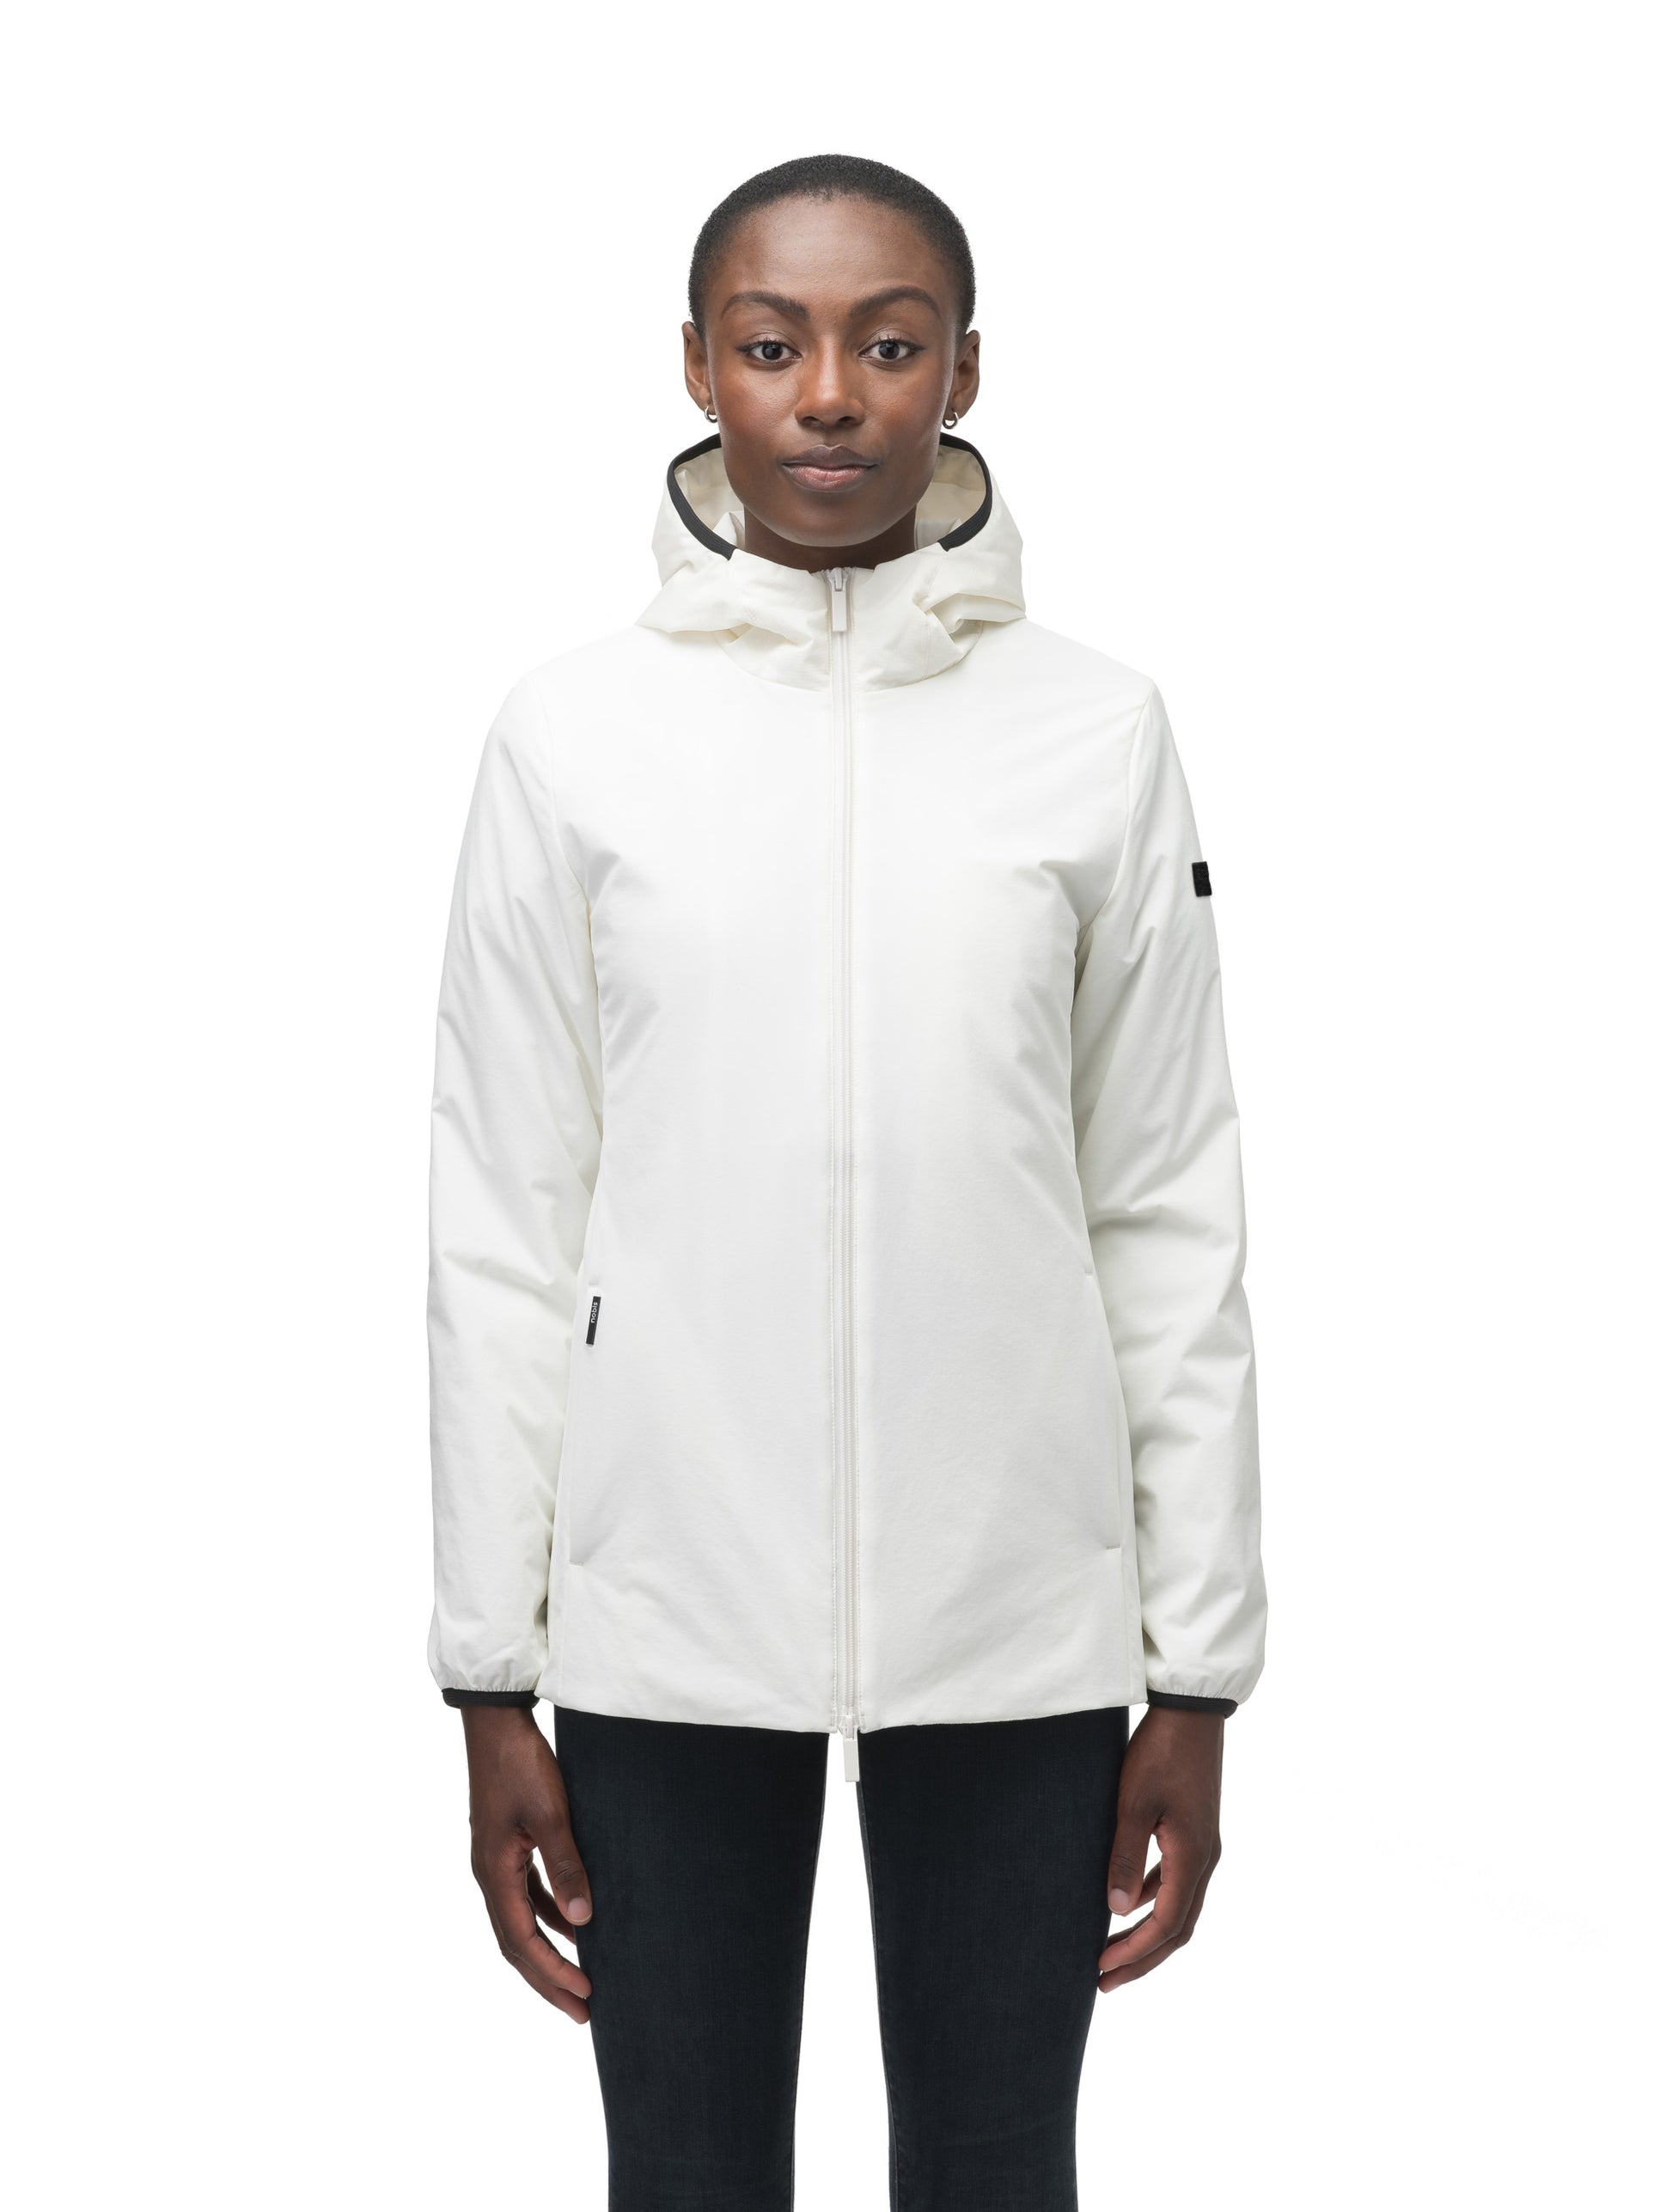 Ladies hip length mid layer jacket with non-removable hood and two-way zipper in Chalk